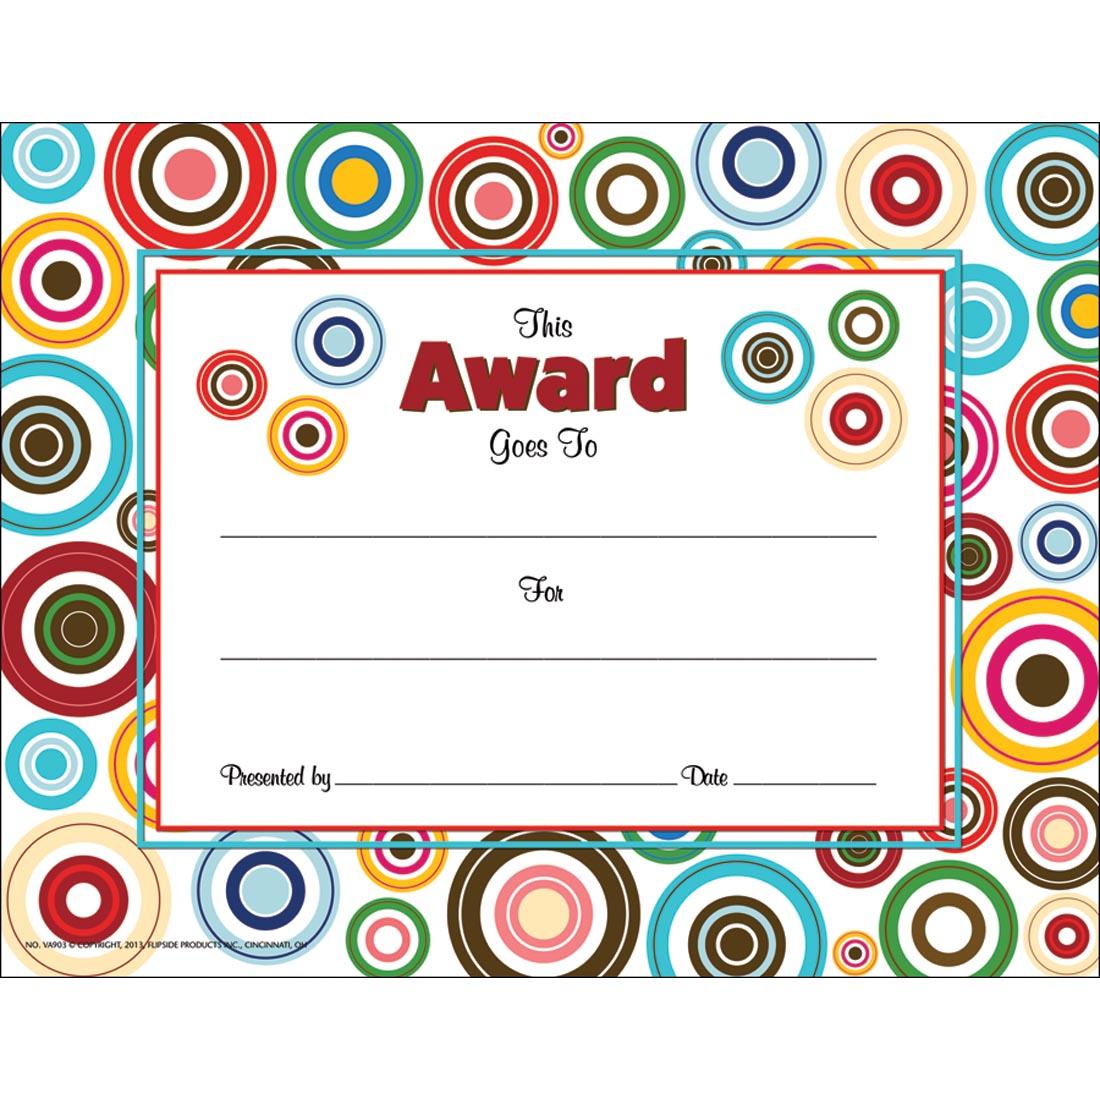 This Award Goes To Certificate decorated with Concentric Circles